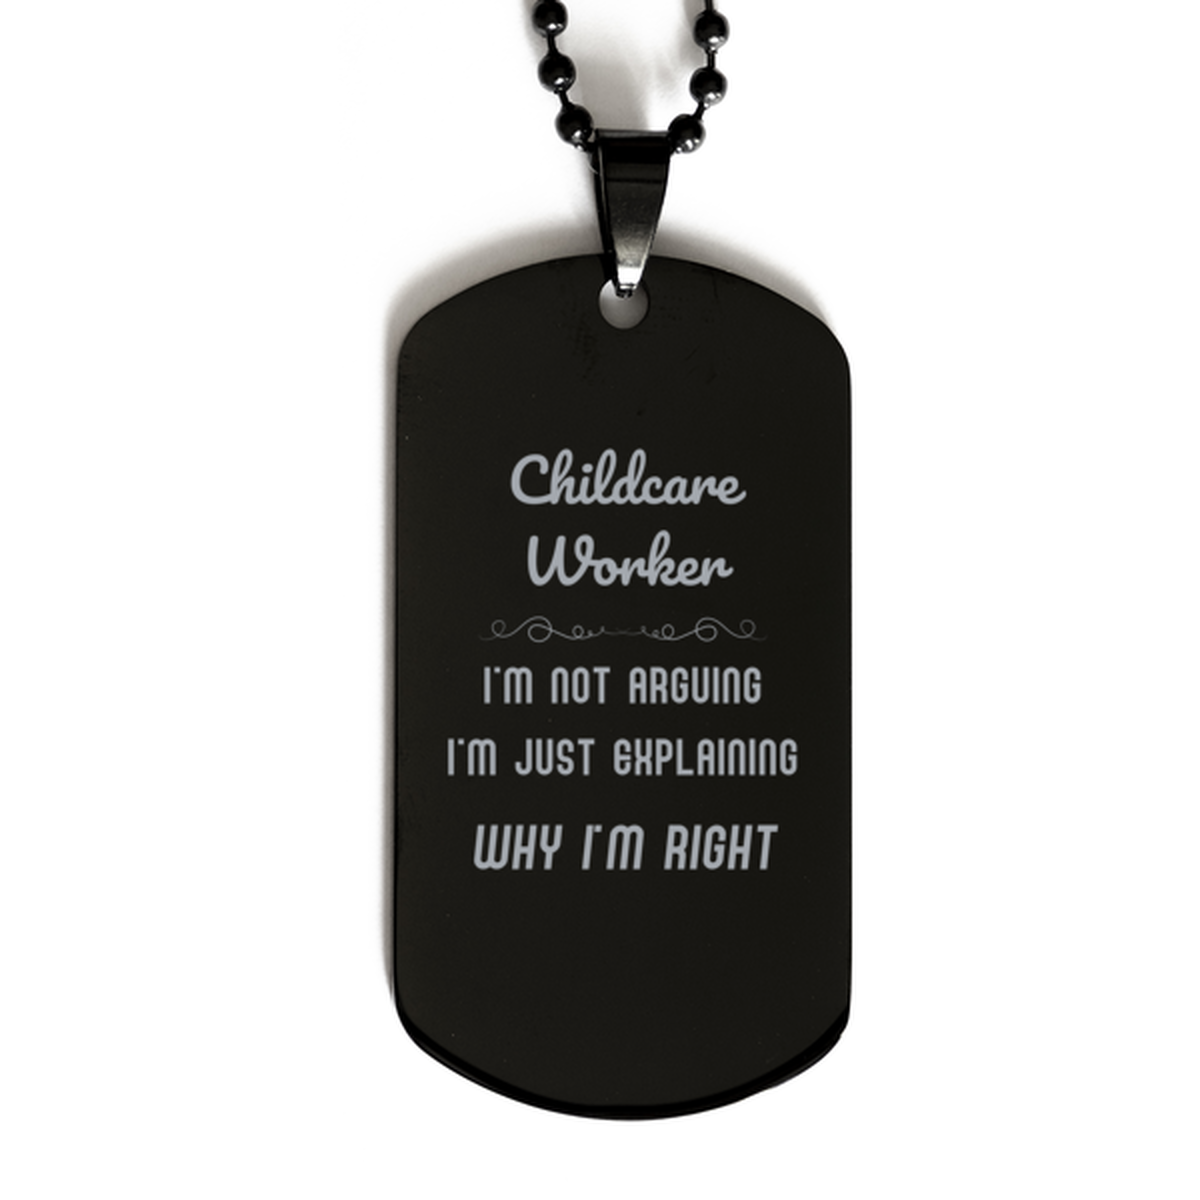 Childcare Worker I'm not Arguing. I'm Just Explaining Why I'm RIGHT Black Dog Tag, Funny Saying Quote Childcare Worker Gifts For Childcare Worker Graduation Birthday Christmas Gifts for Men Women Coworker